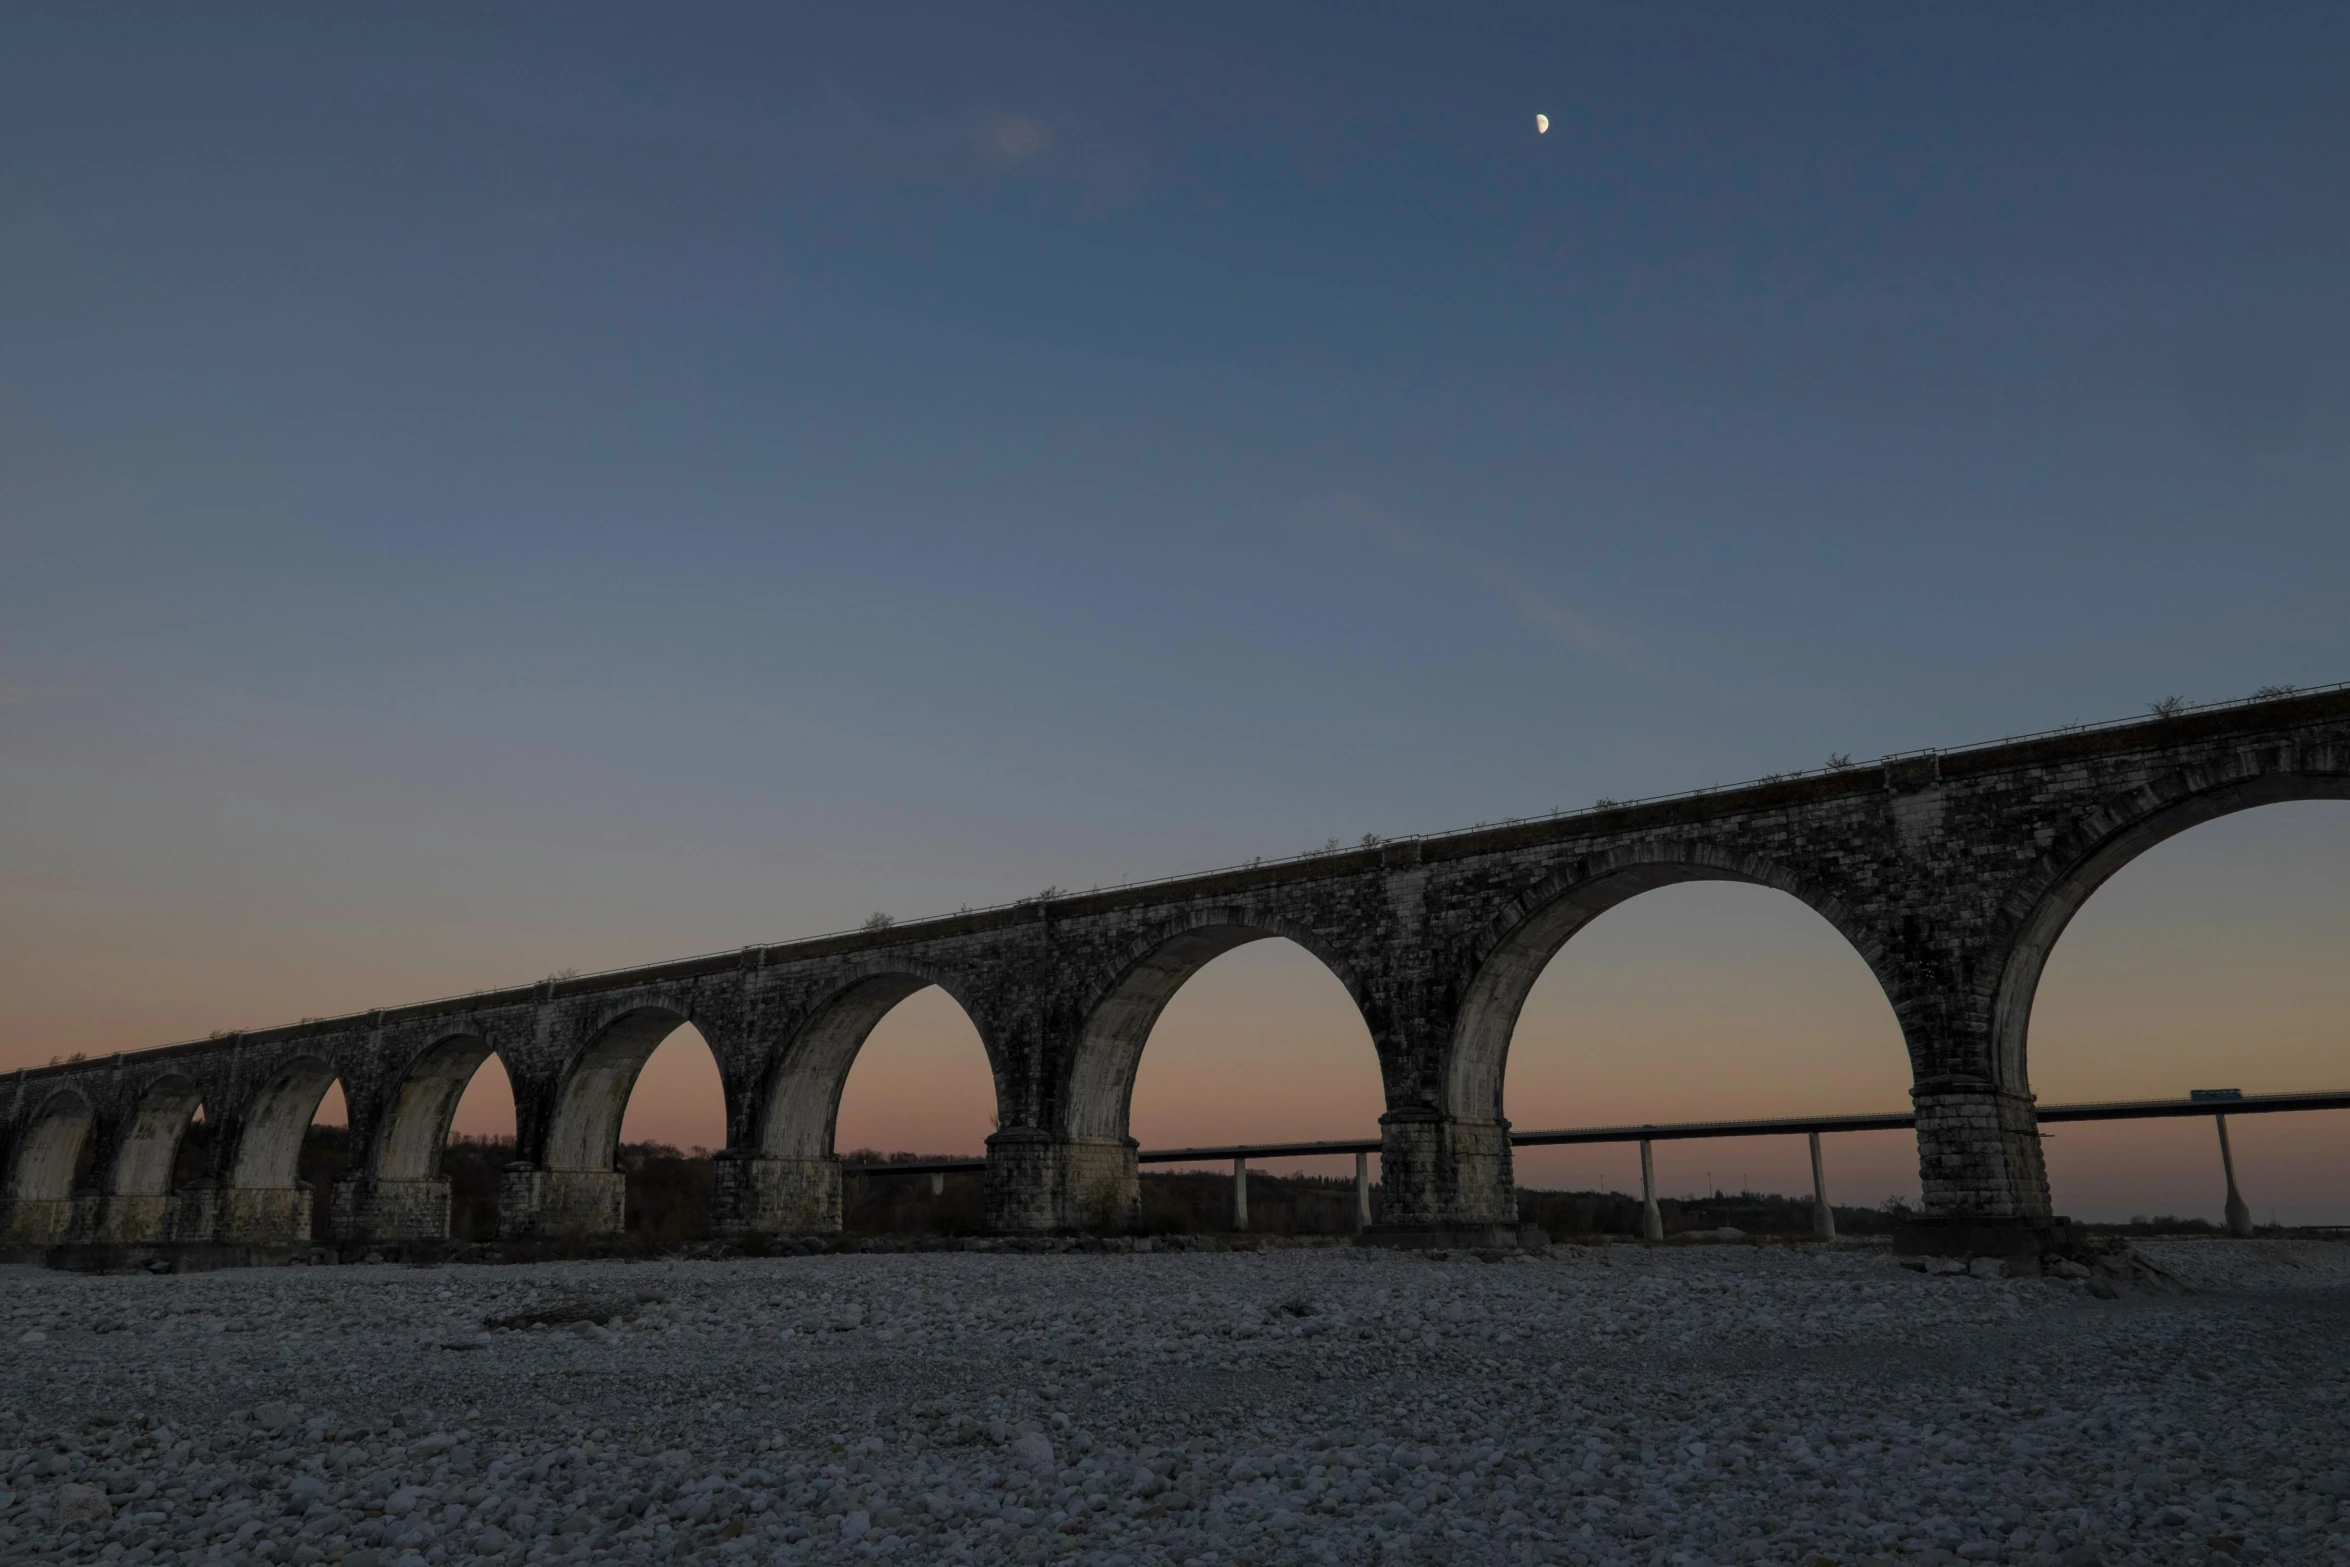 an ancient aqueduct bridge over the water at night